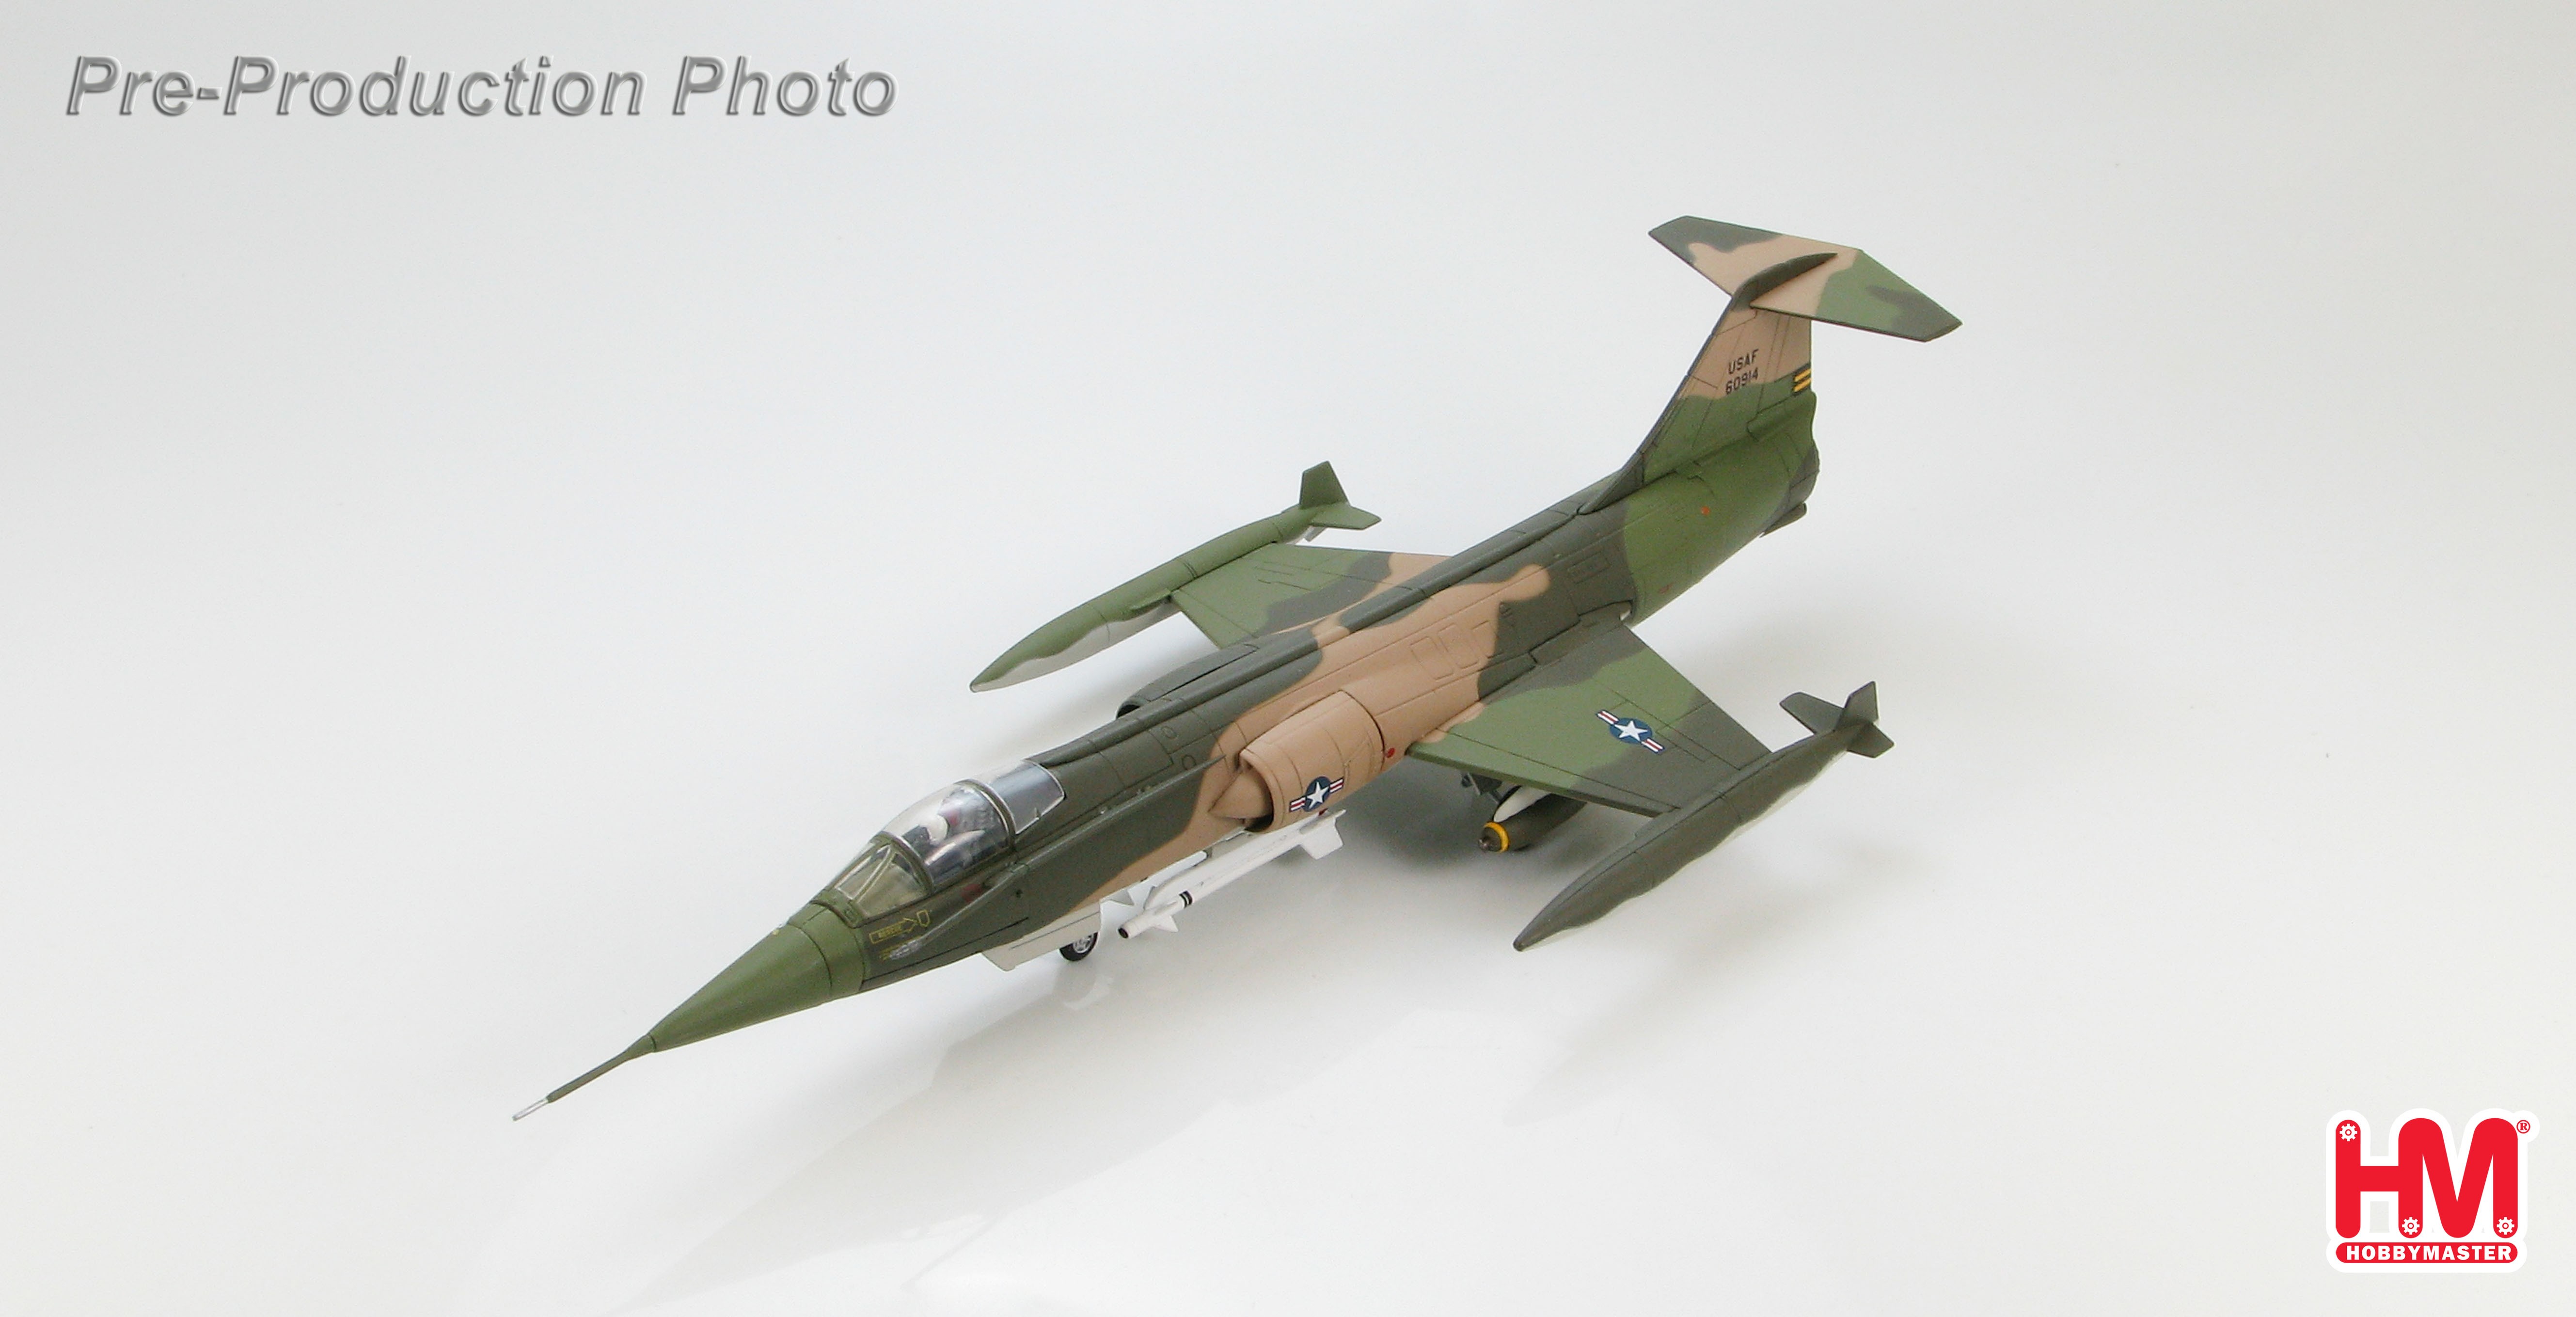 Highly detailed Hobby Master US Air Force F-104D Starfighter 